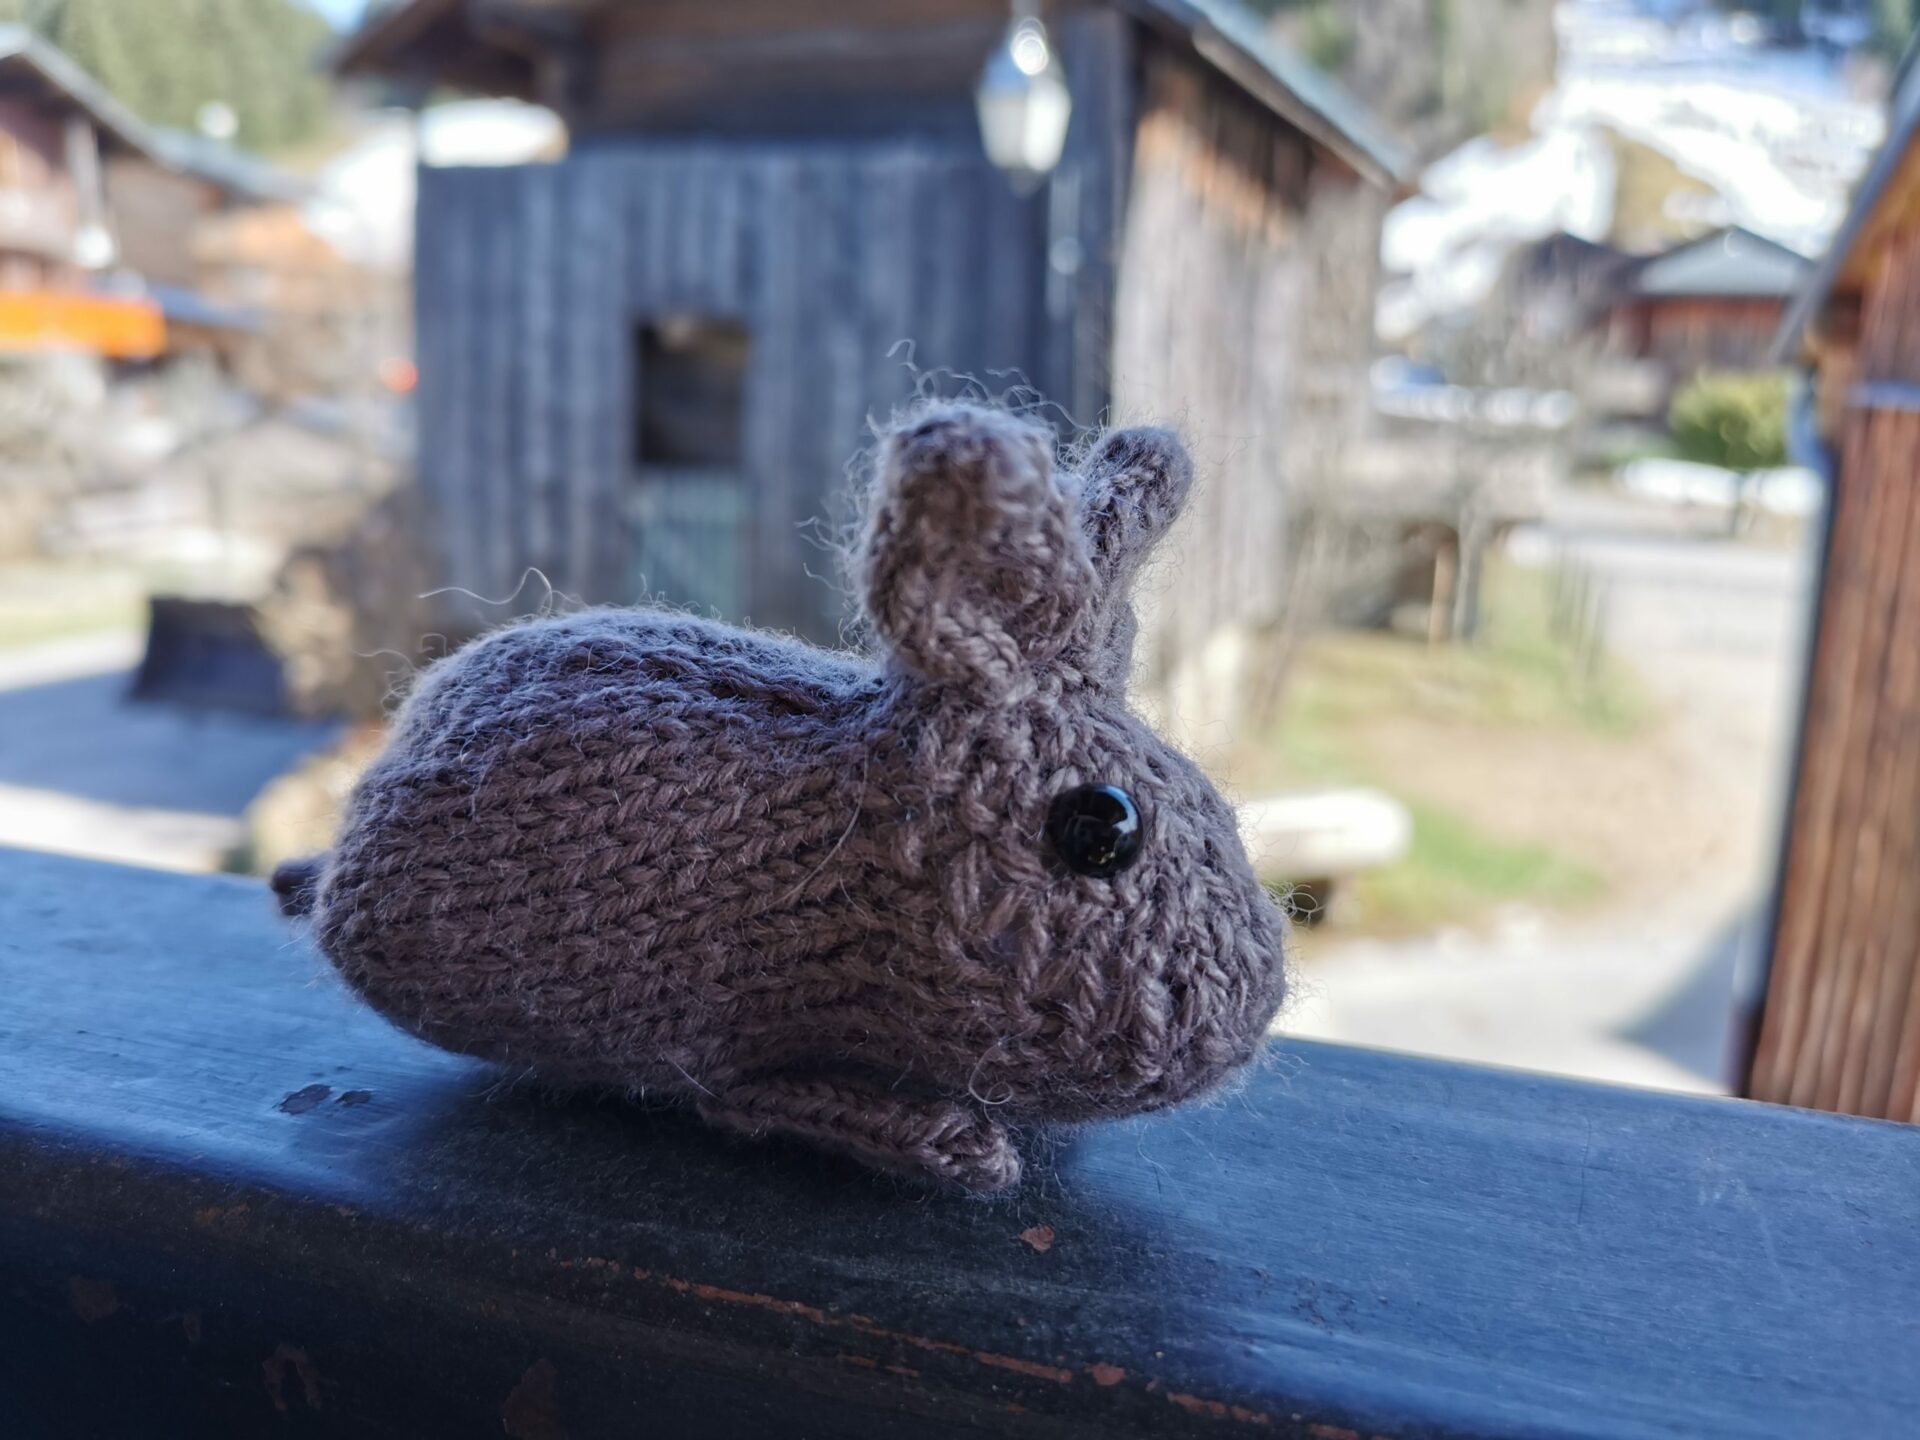 Lapin tricot